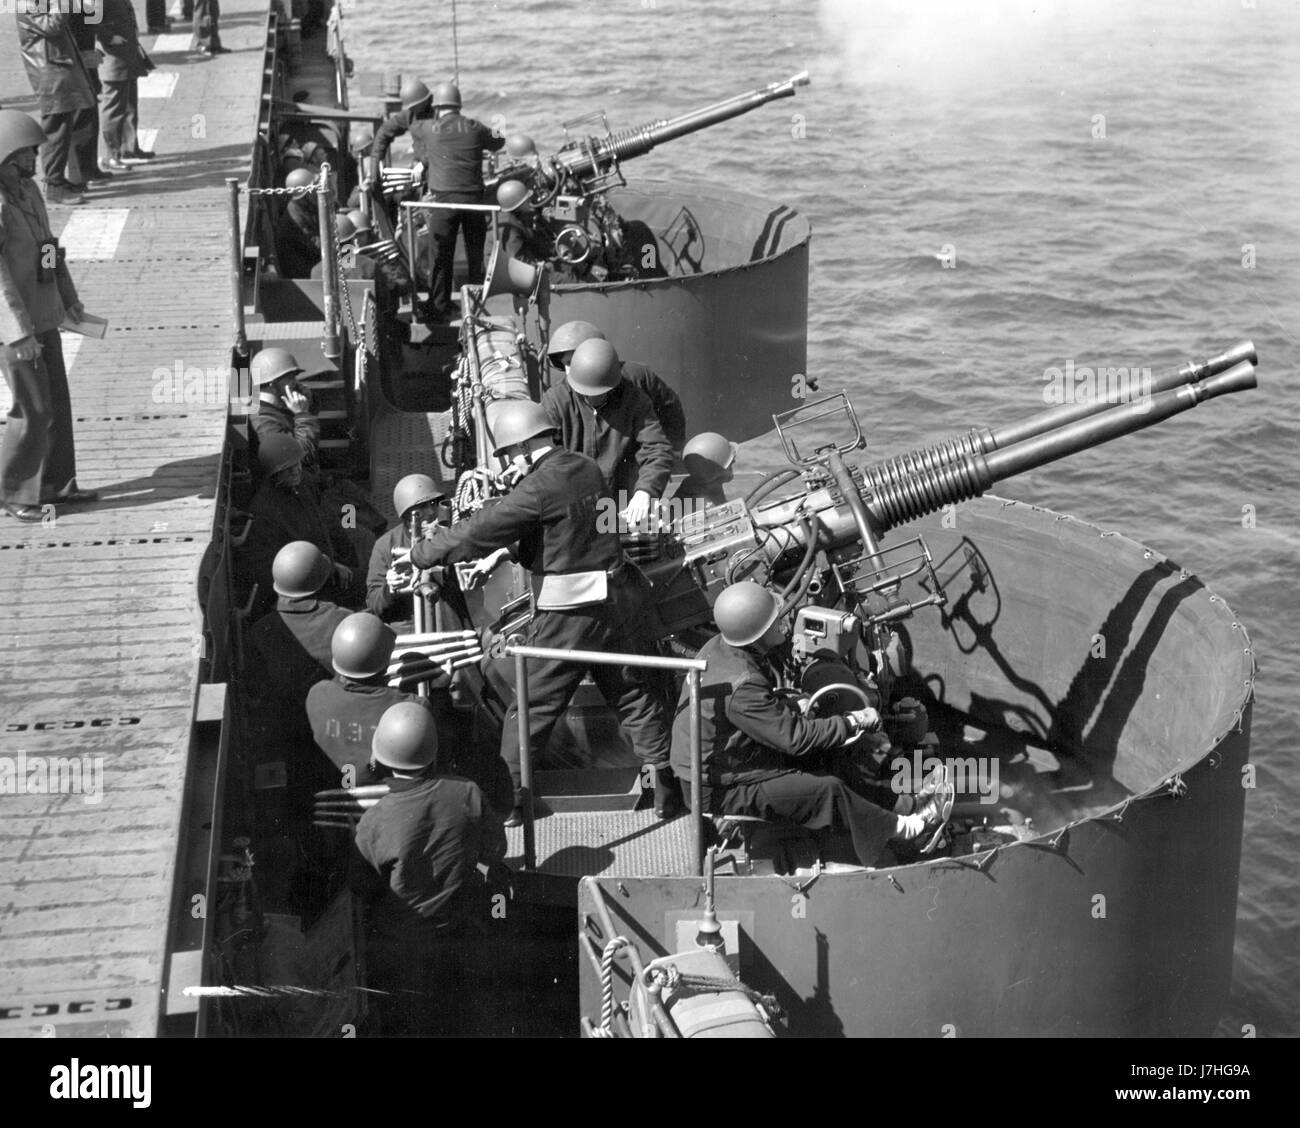 WW II - Two twin 40mm Bofors guns, practicing for battle. Per text printed on this photo's back, these guns are mounted on 'one of America's newest aircraft carriers--a sleek, streamlined warship converted from a light cruiser.''   This Jun. 21, 1943 photo shows Bofors anti-aircraft guns practicing during the ship's shakedown cruise. This Official U.S. Navy photograph does not identify the ship or any of the crew.  To see my related vintage images, Search:  Prestor  vintage   WW II  weapon   vehicle Stock Photo